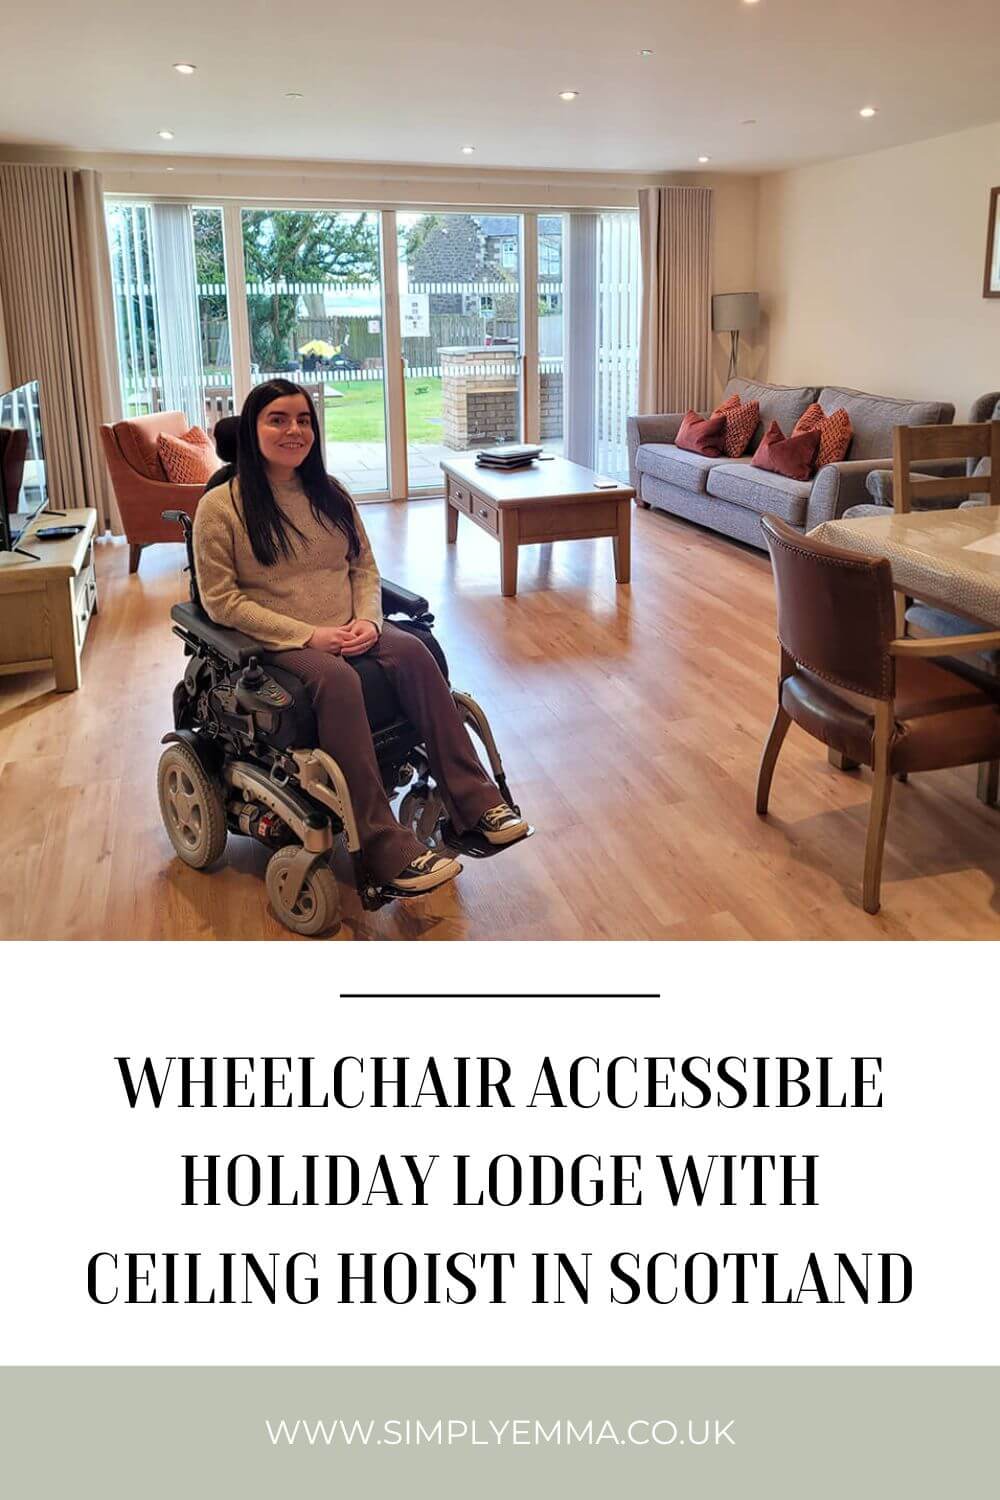 Pinterest image showing Emma sat in her powerchair in the lounge at Homelands. Text across image reads "Wheelchair Accessible Holiday Lodge with ceiling hoist in Scotland"